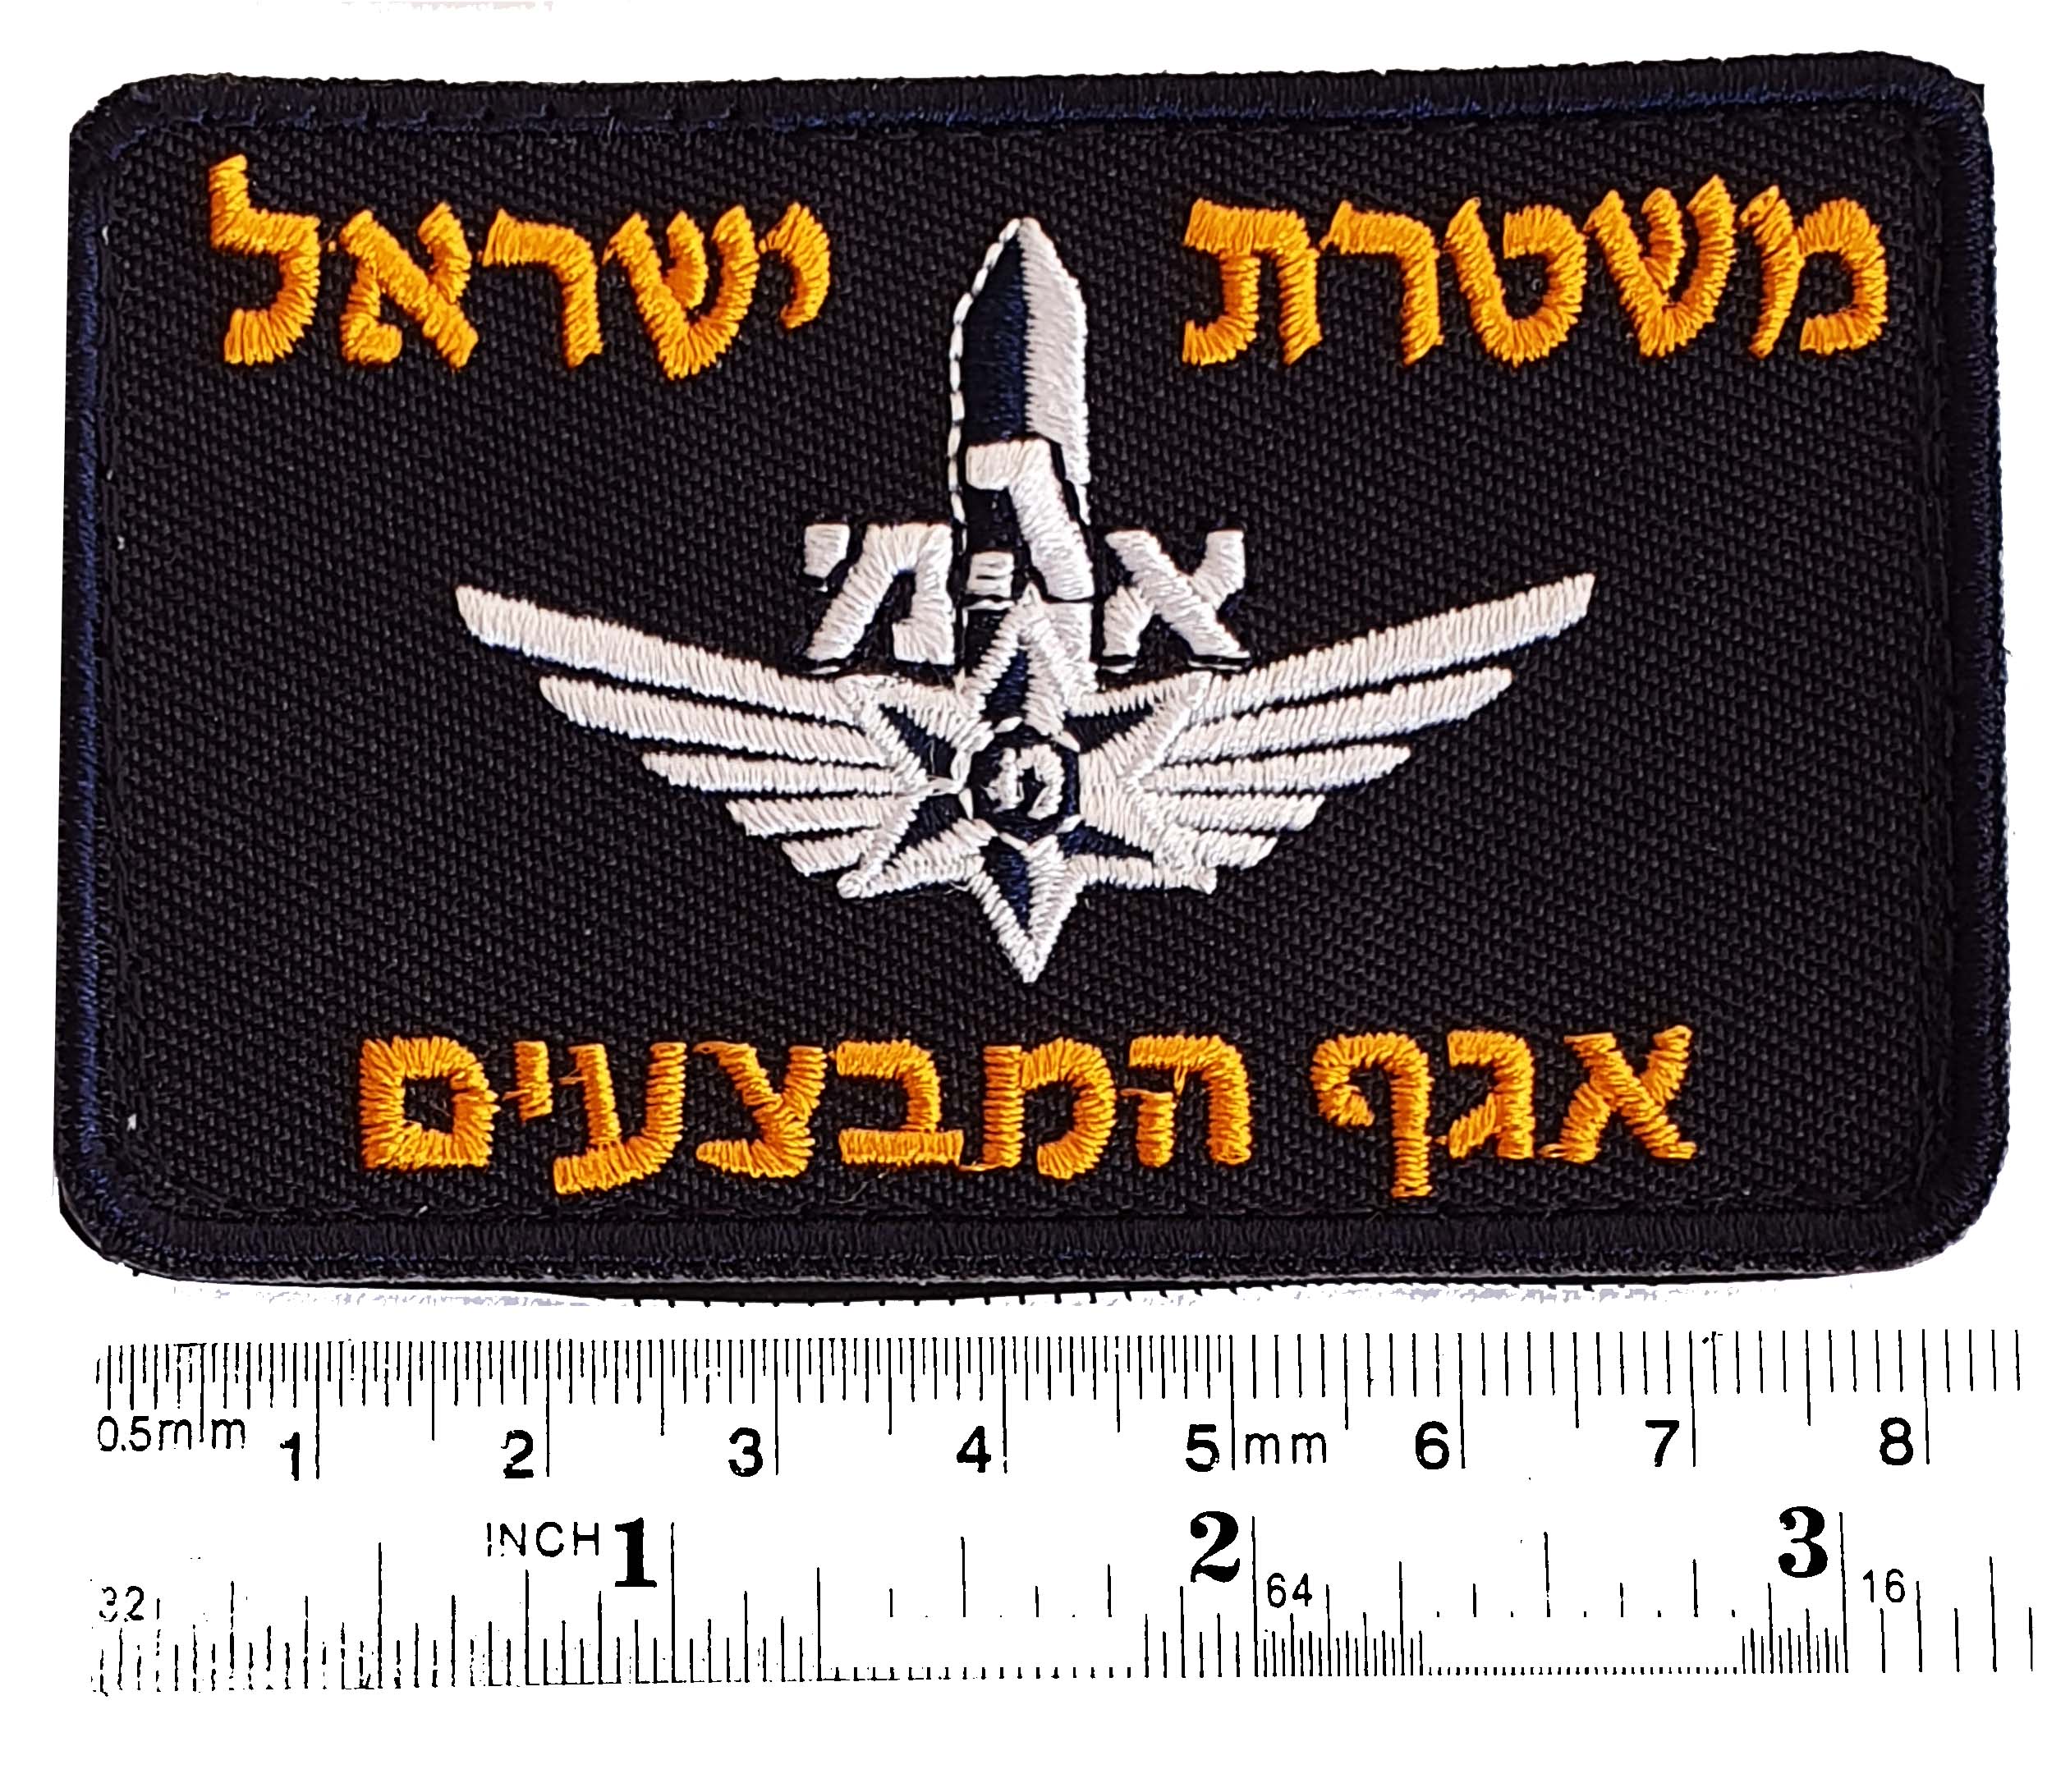 Israeli Patrol Operations Division Department Policing Security Uniform Patch Yellow Letter Embroidery